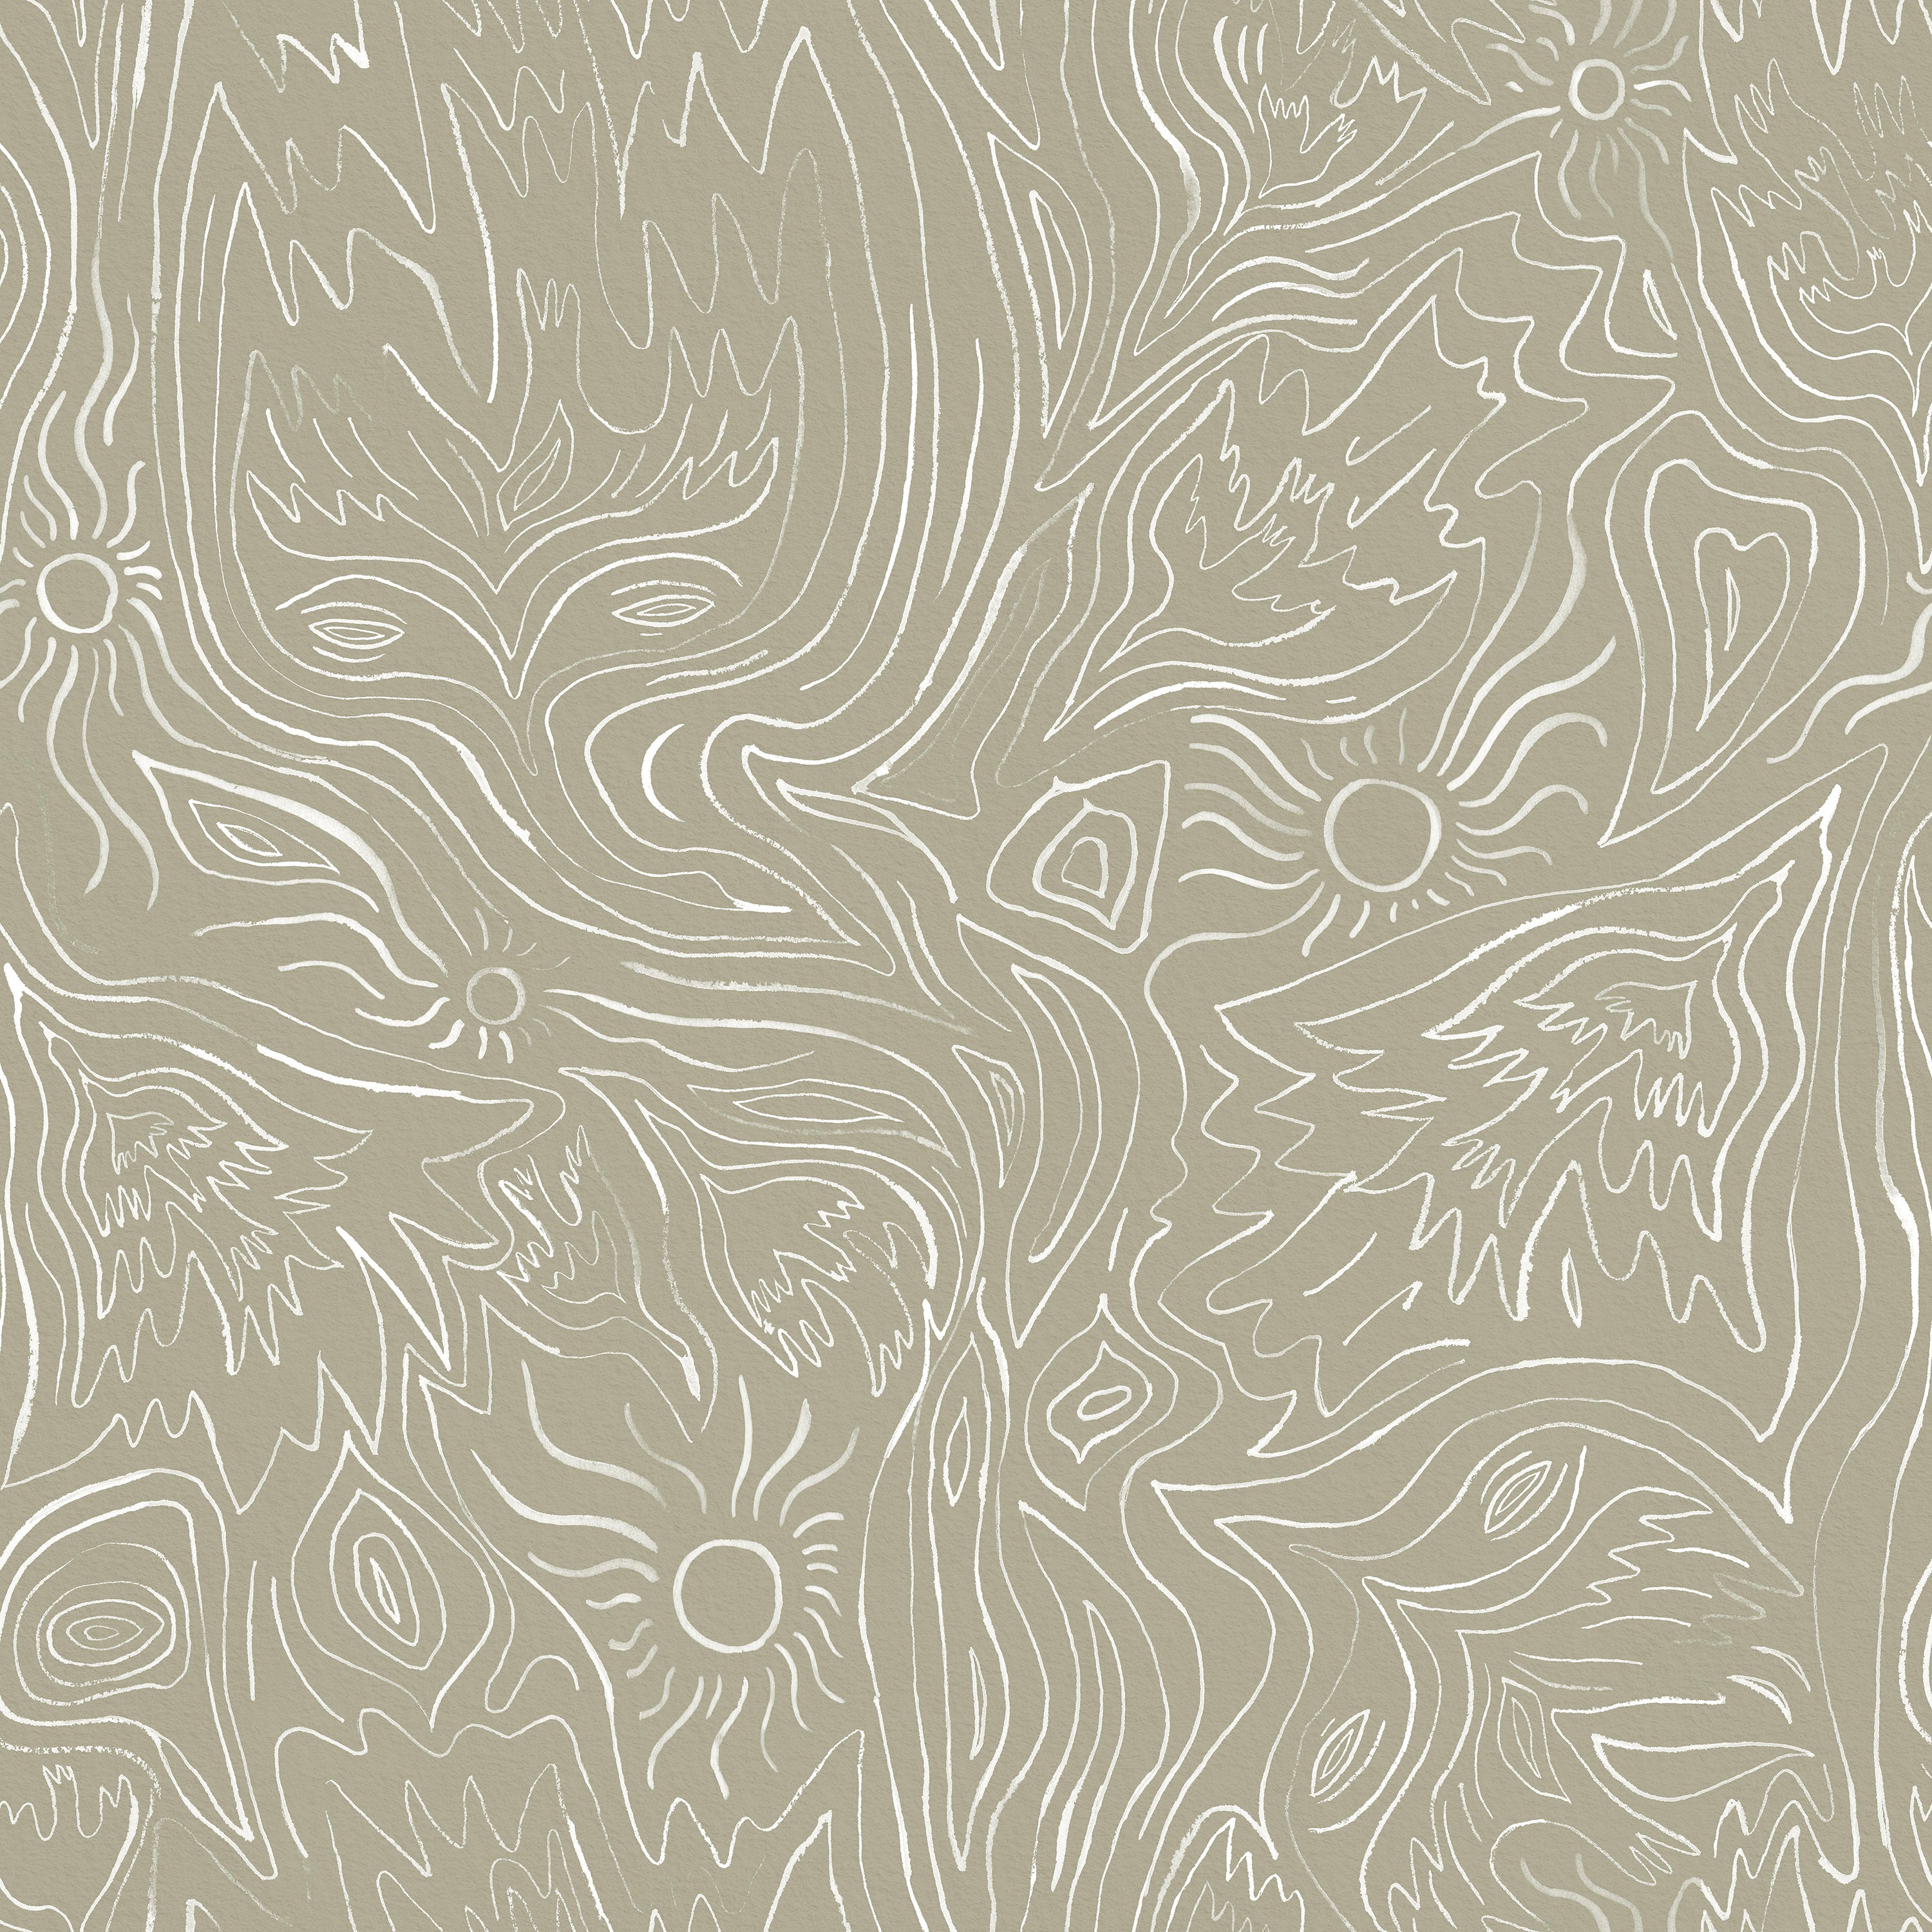 Detail of wallpaper in a playful abstract sun print in white on a tan field.